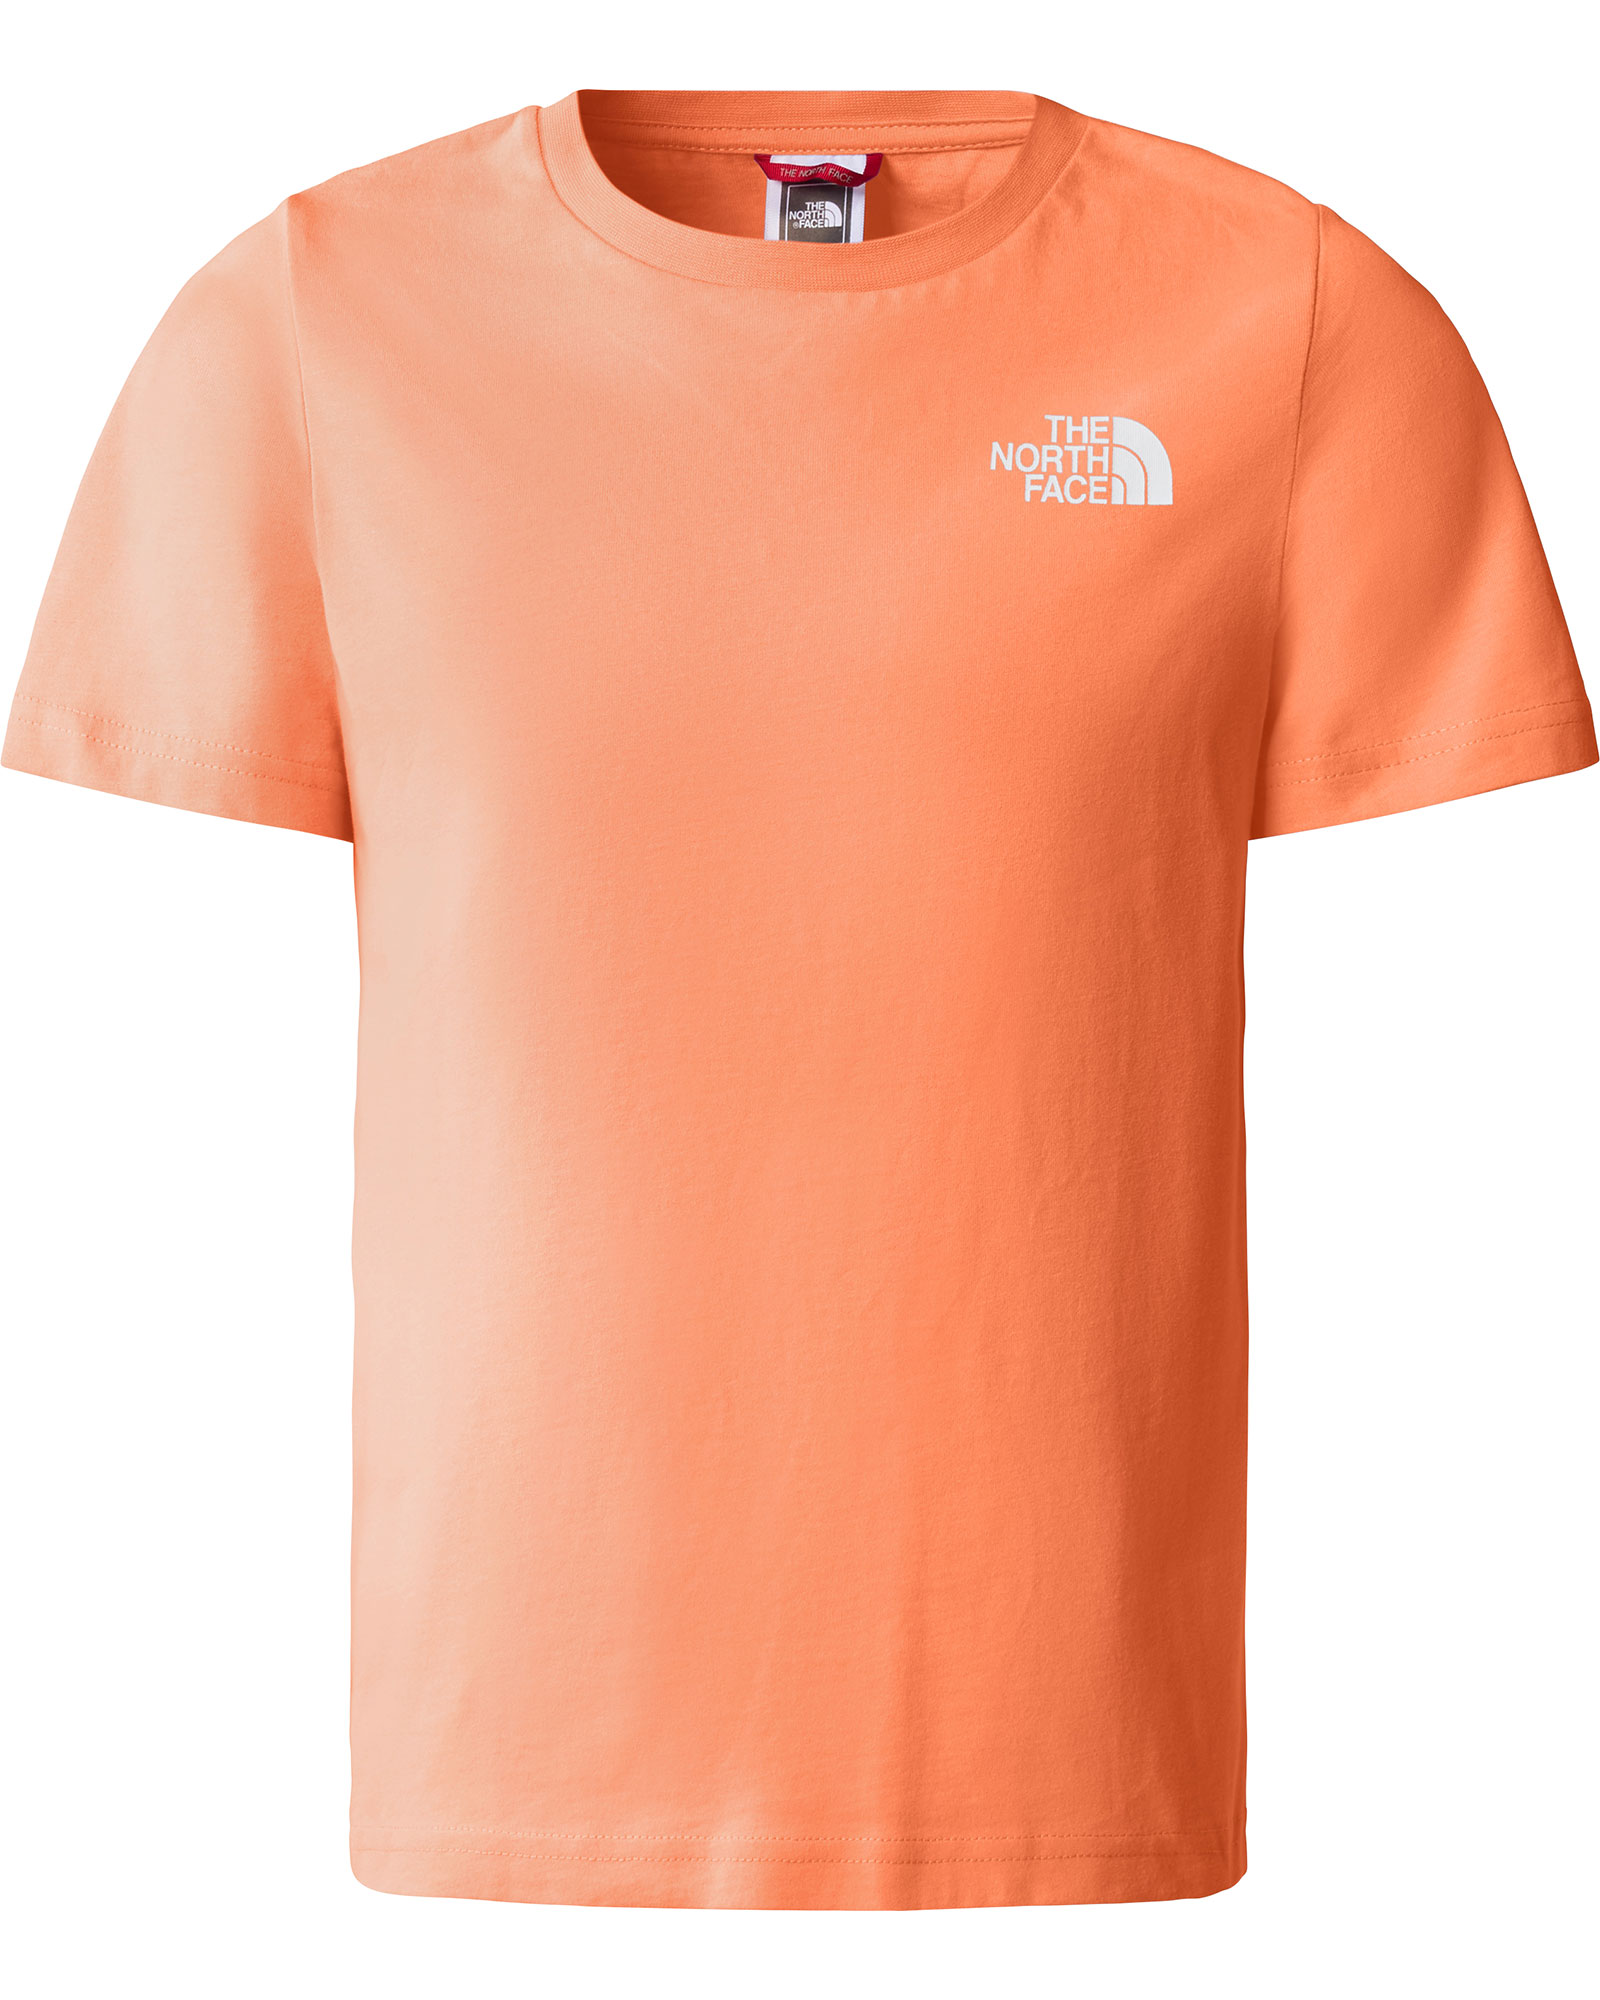 The North Face Girls Relaxed Redbox T-shirt